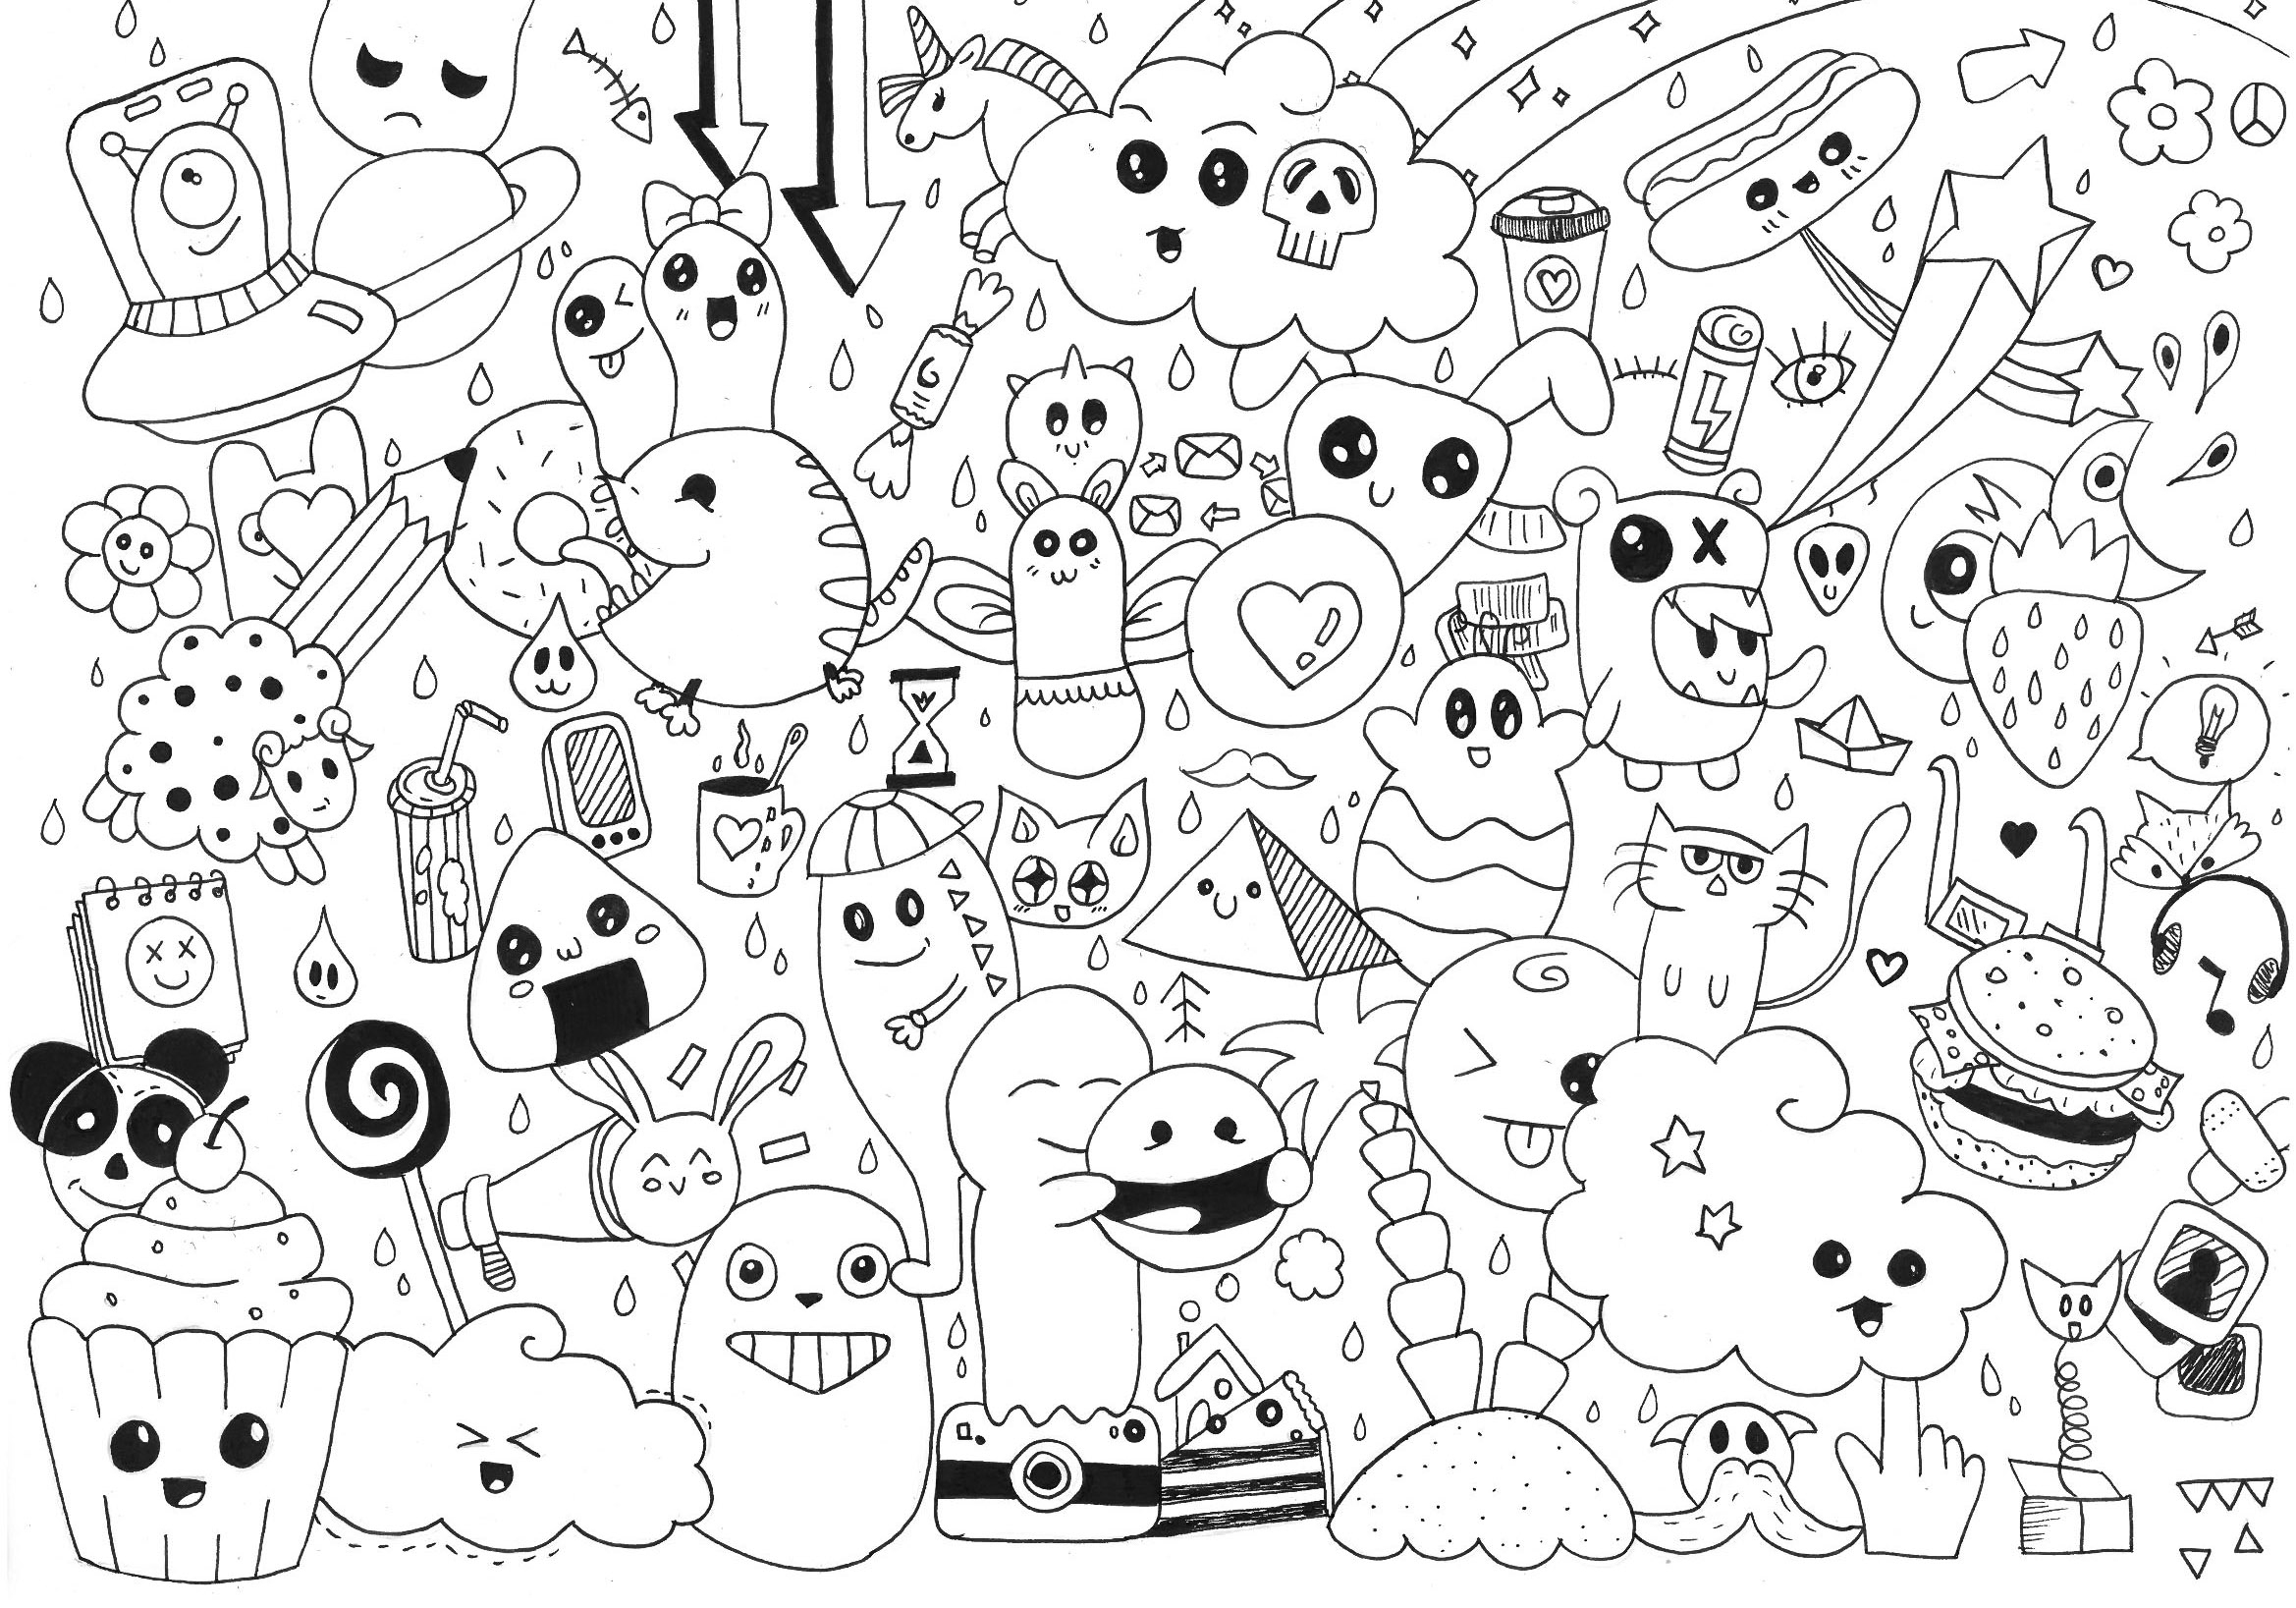 Doodle Art To Print For Free - Doodle Art Kids Coloring Pages - Free Printable Doodle Art Coloring Pages